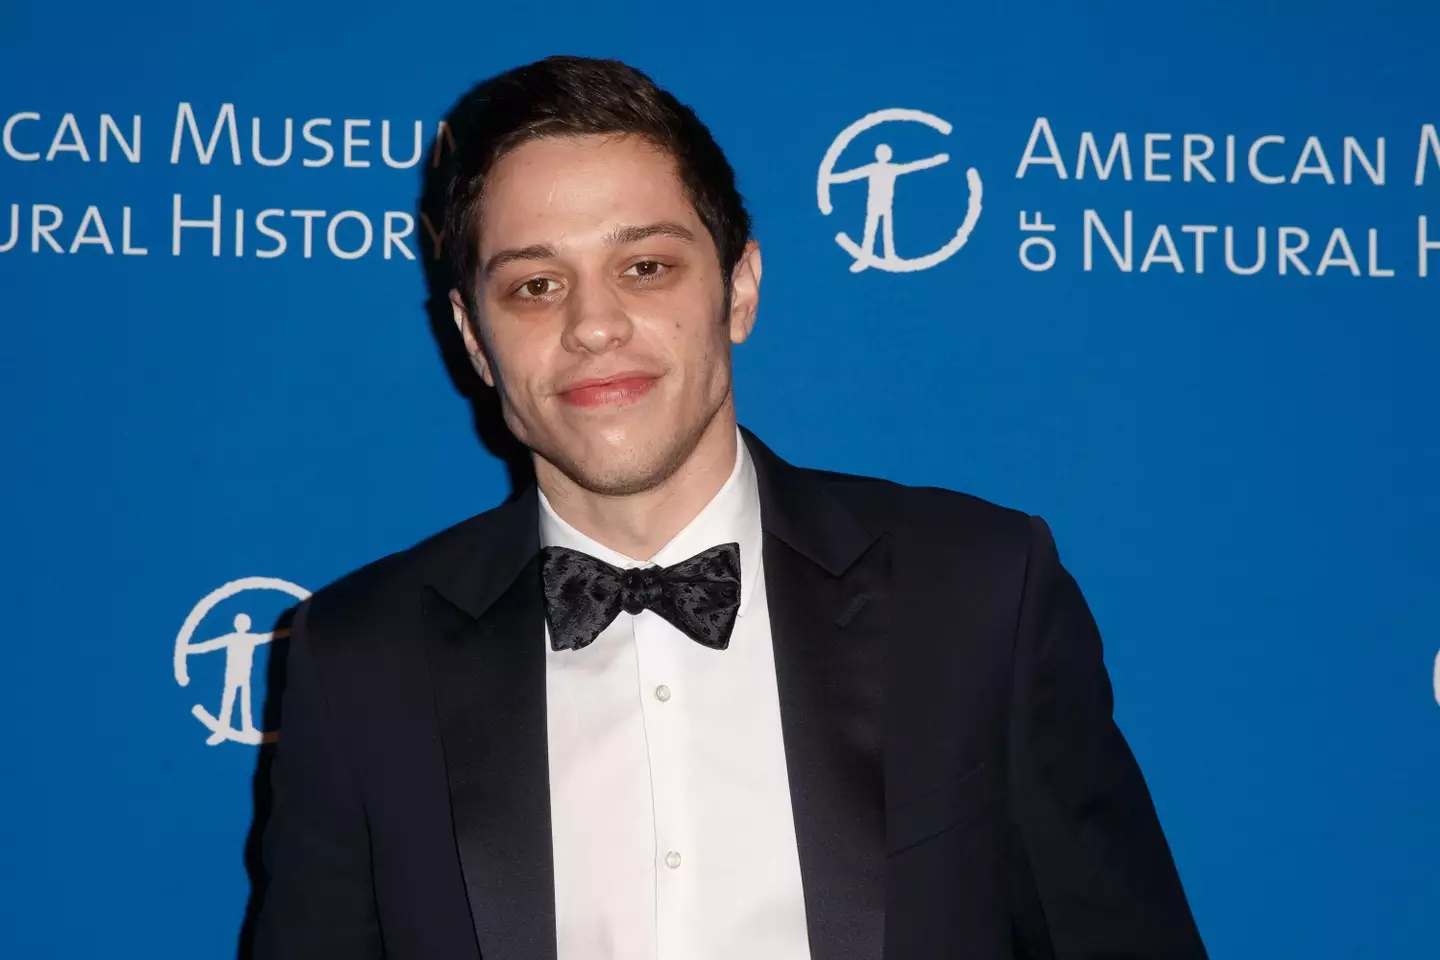 Pete Davidson's relationship history is impressive, to say the least.